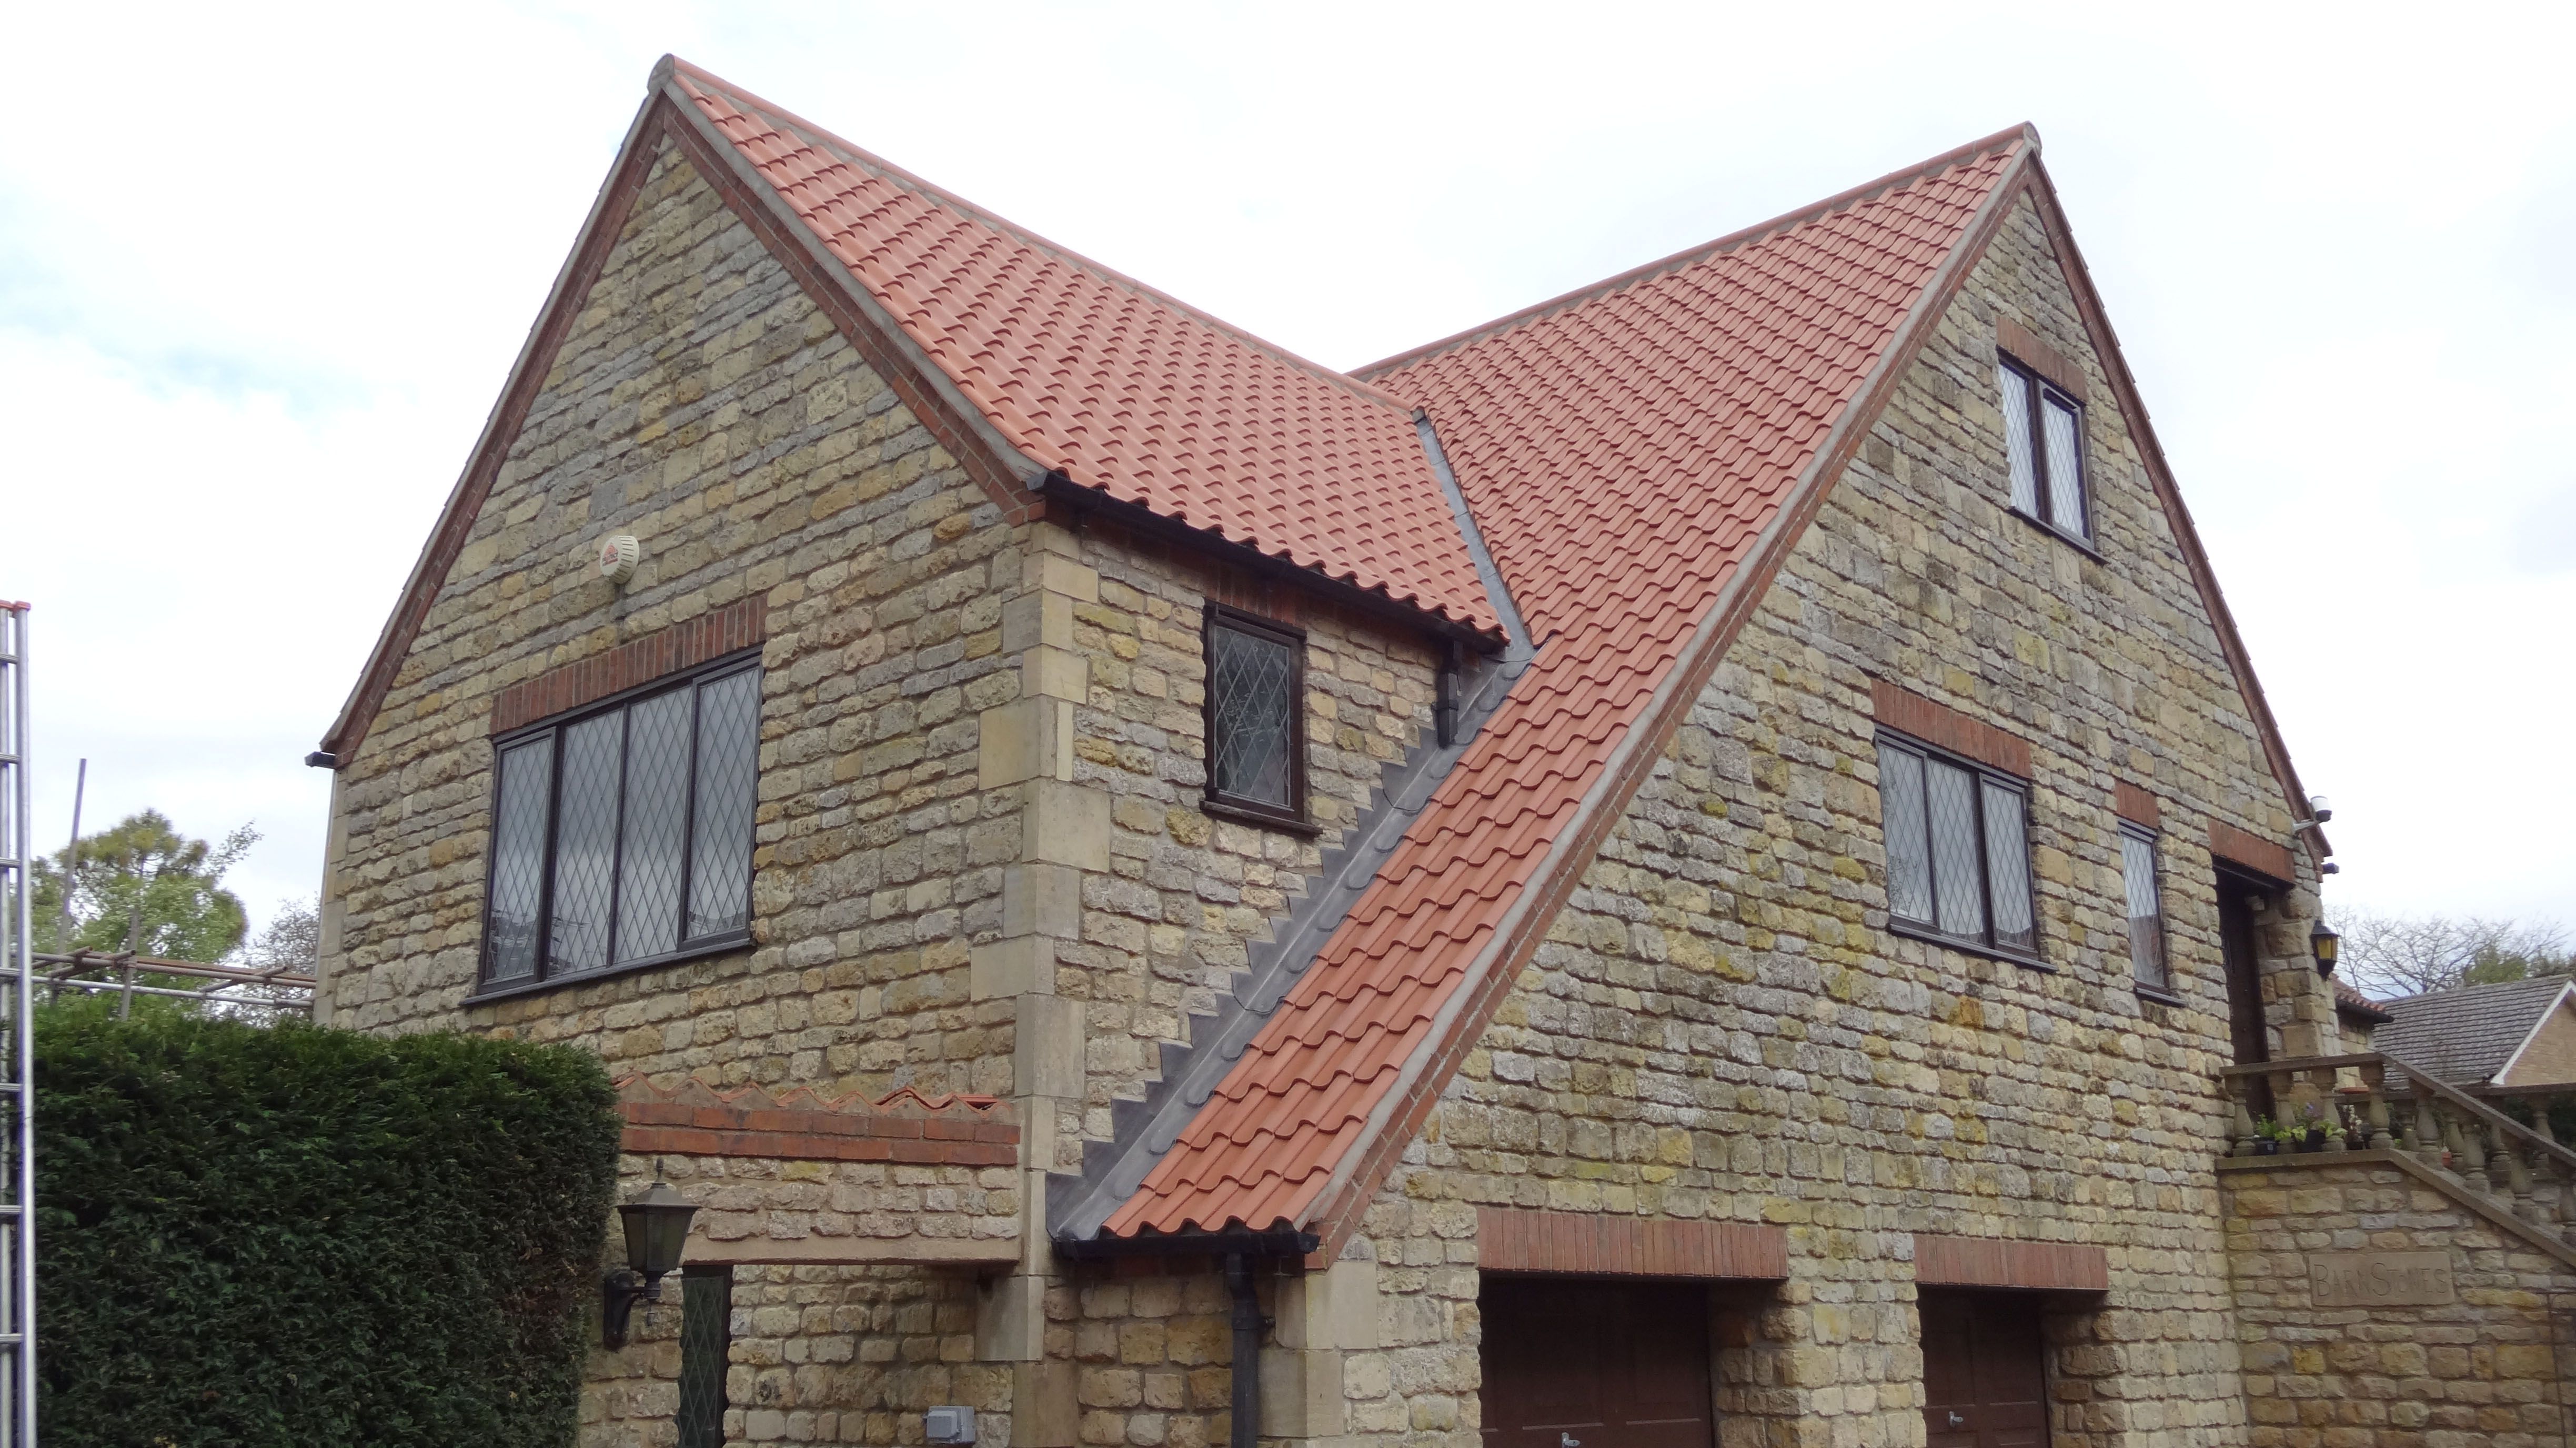 Single-lap Tiling and Slating – Wienerberger (with Timby Traditional Roofing), Burgess, Wellingore